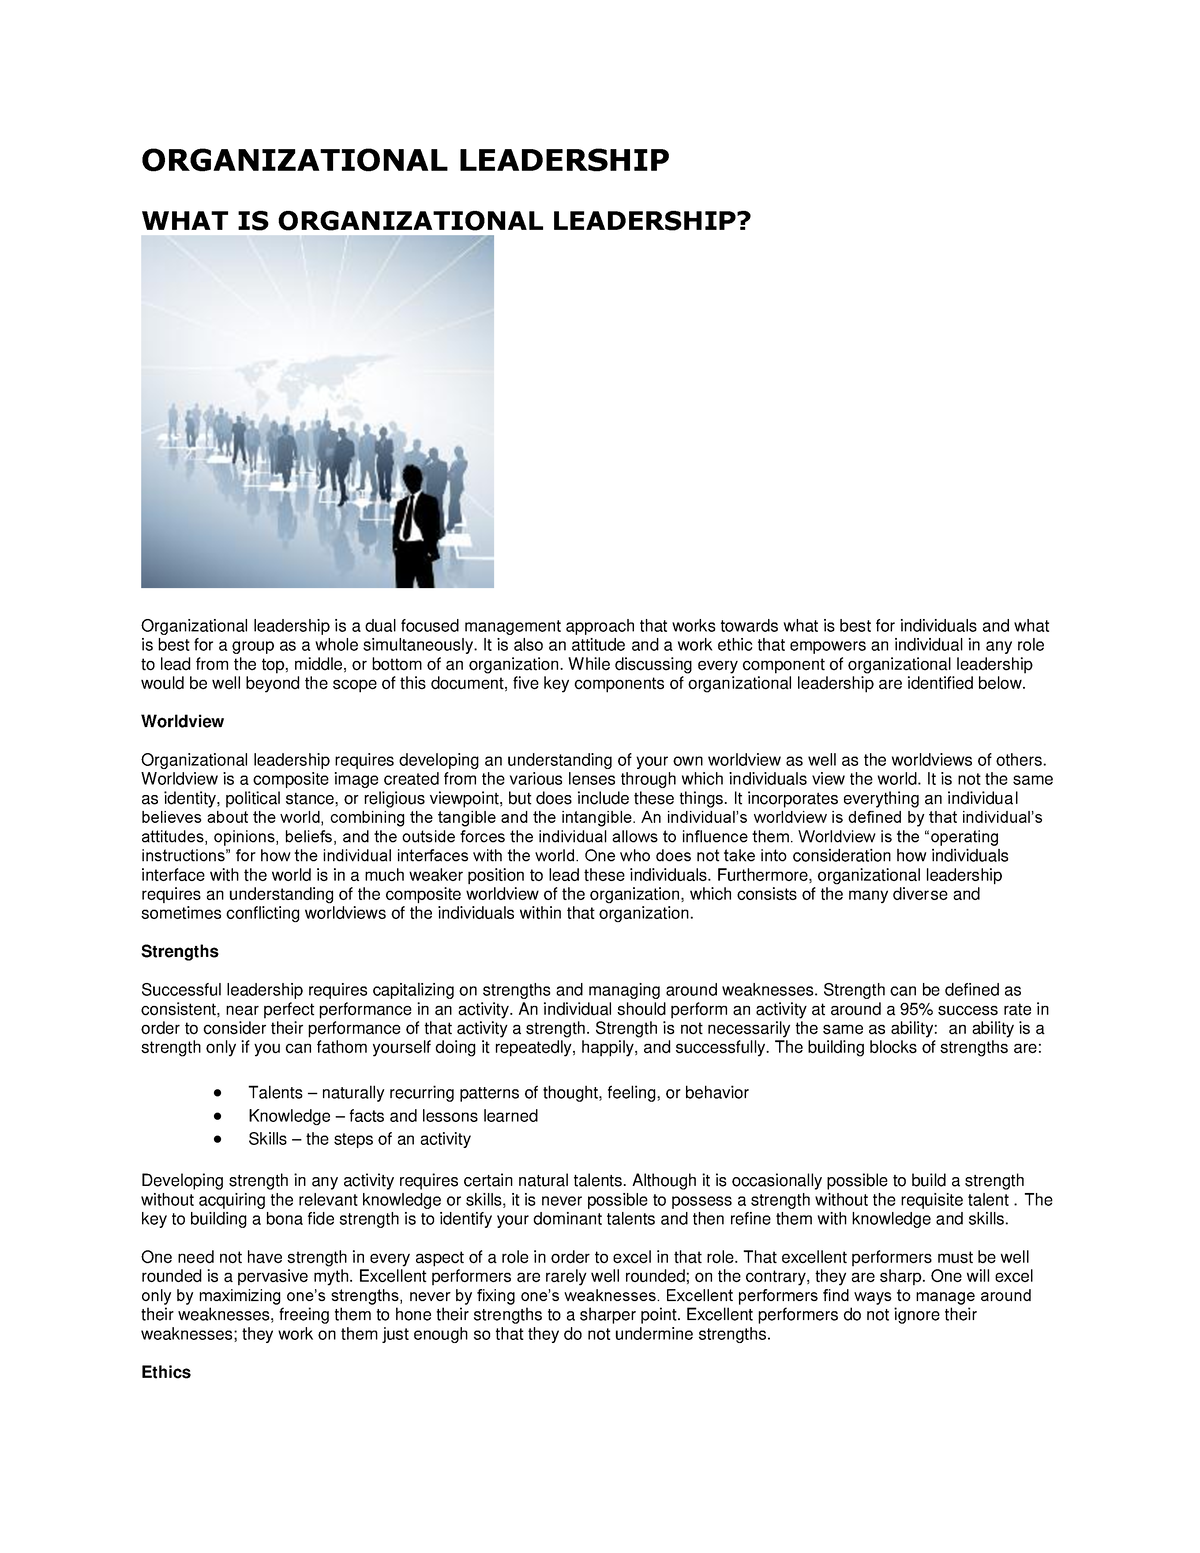 research papers on organizational leadership